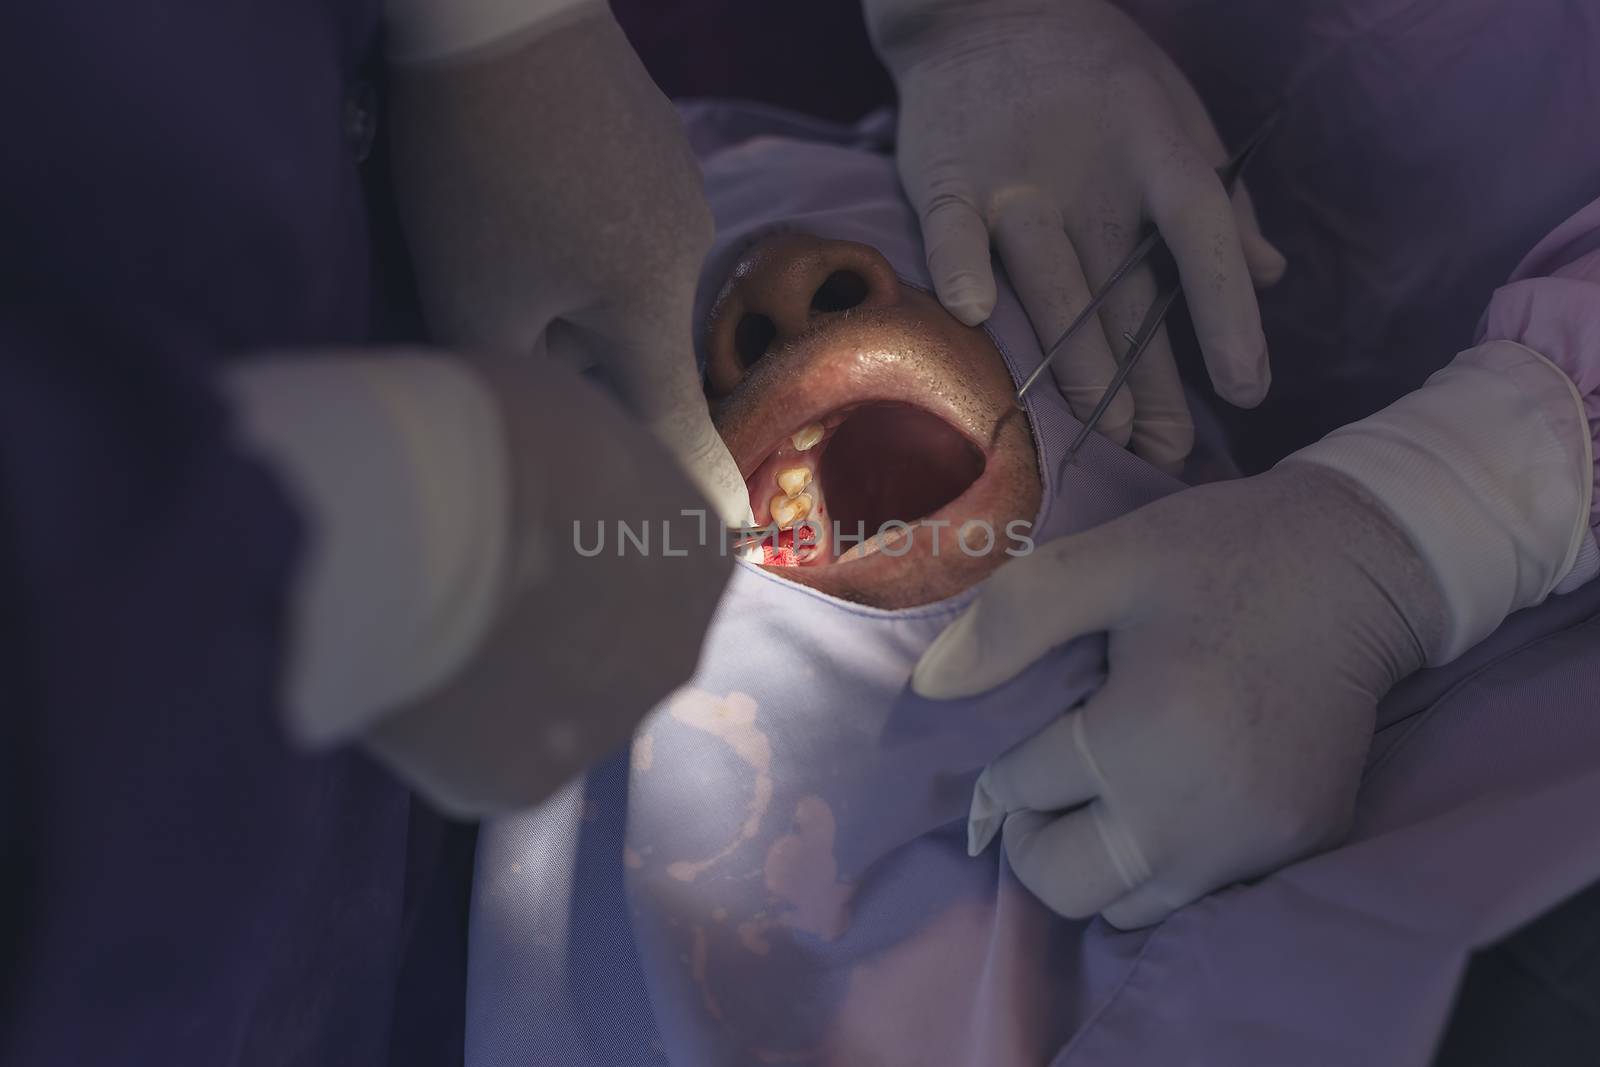 The dentist is removing the decaying tooth from the young man's mouth.